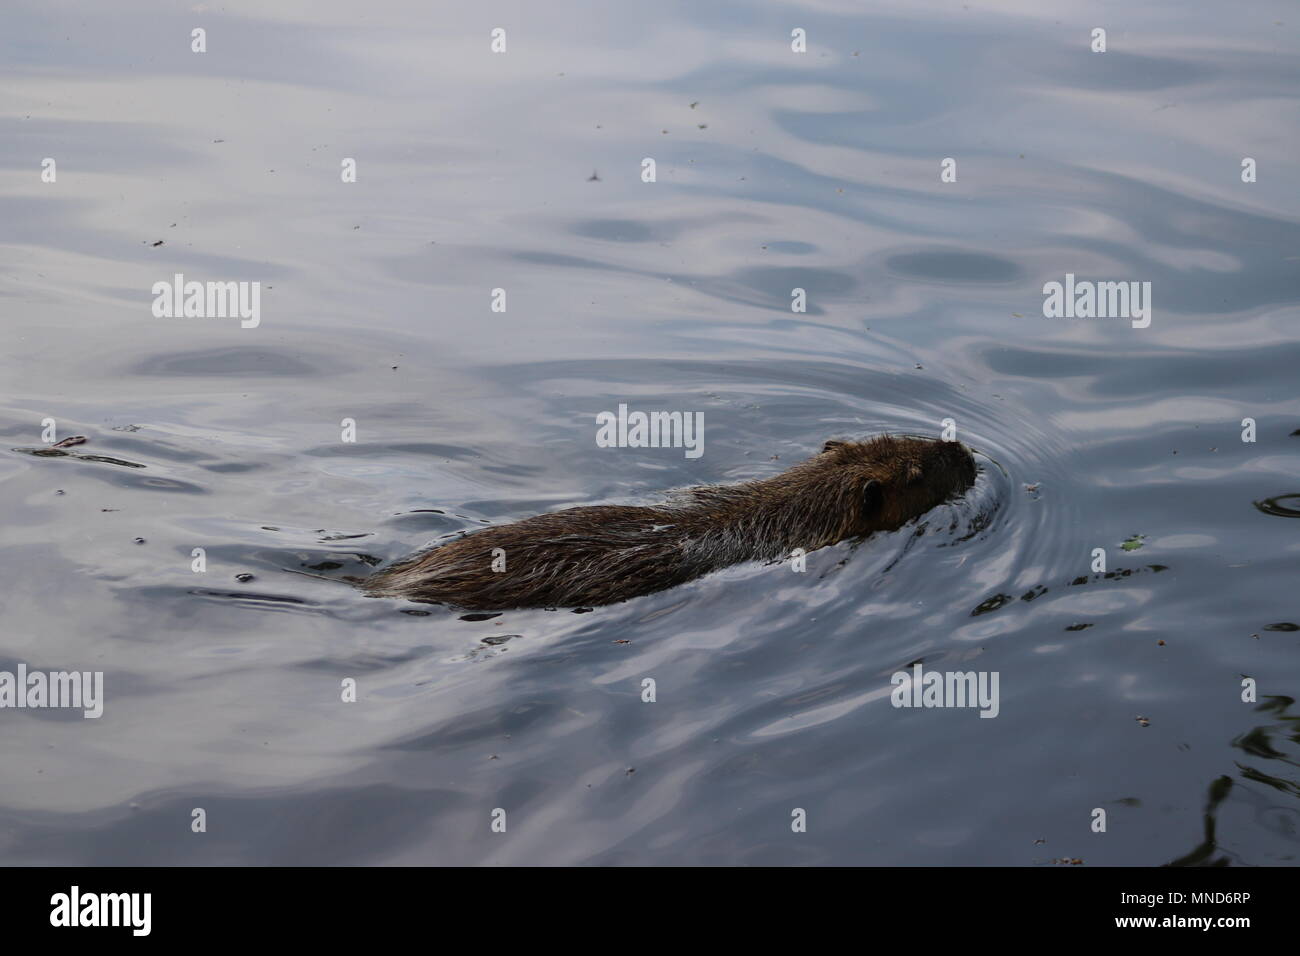 Portrait of a large coypu, also known as the nutria, swimming in shallow waters Stock Photo